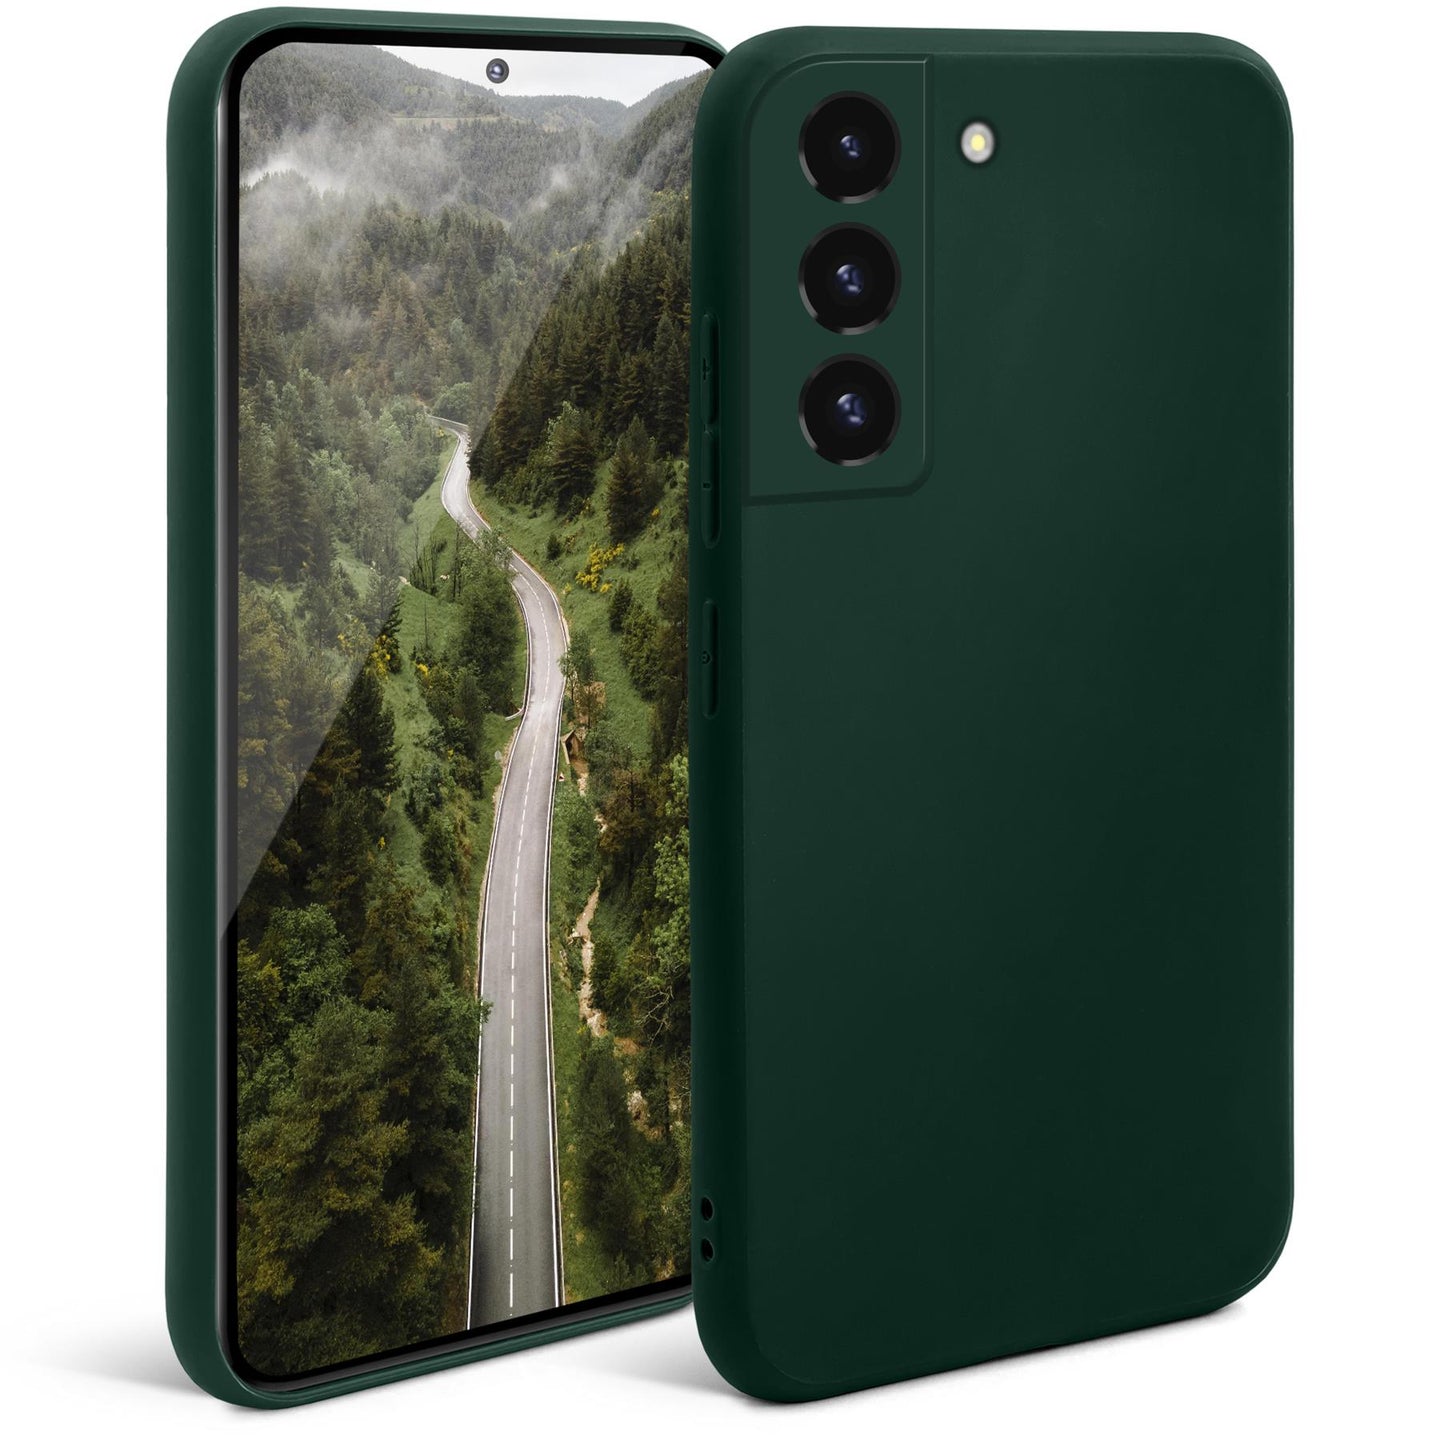 Moozy Minimalist Series Silicone Case for Samsung S22, Dark Green - Matte Finish Lightweight Mobile Phone Case Slim Soft Protective TPU Cover with Matte Surface